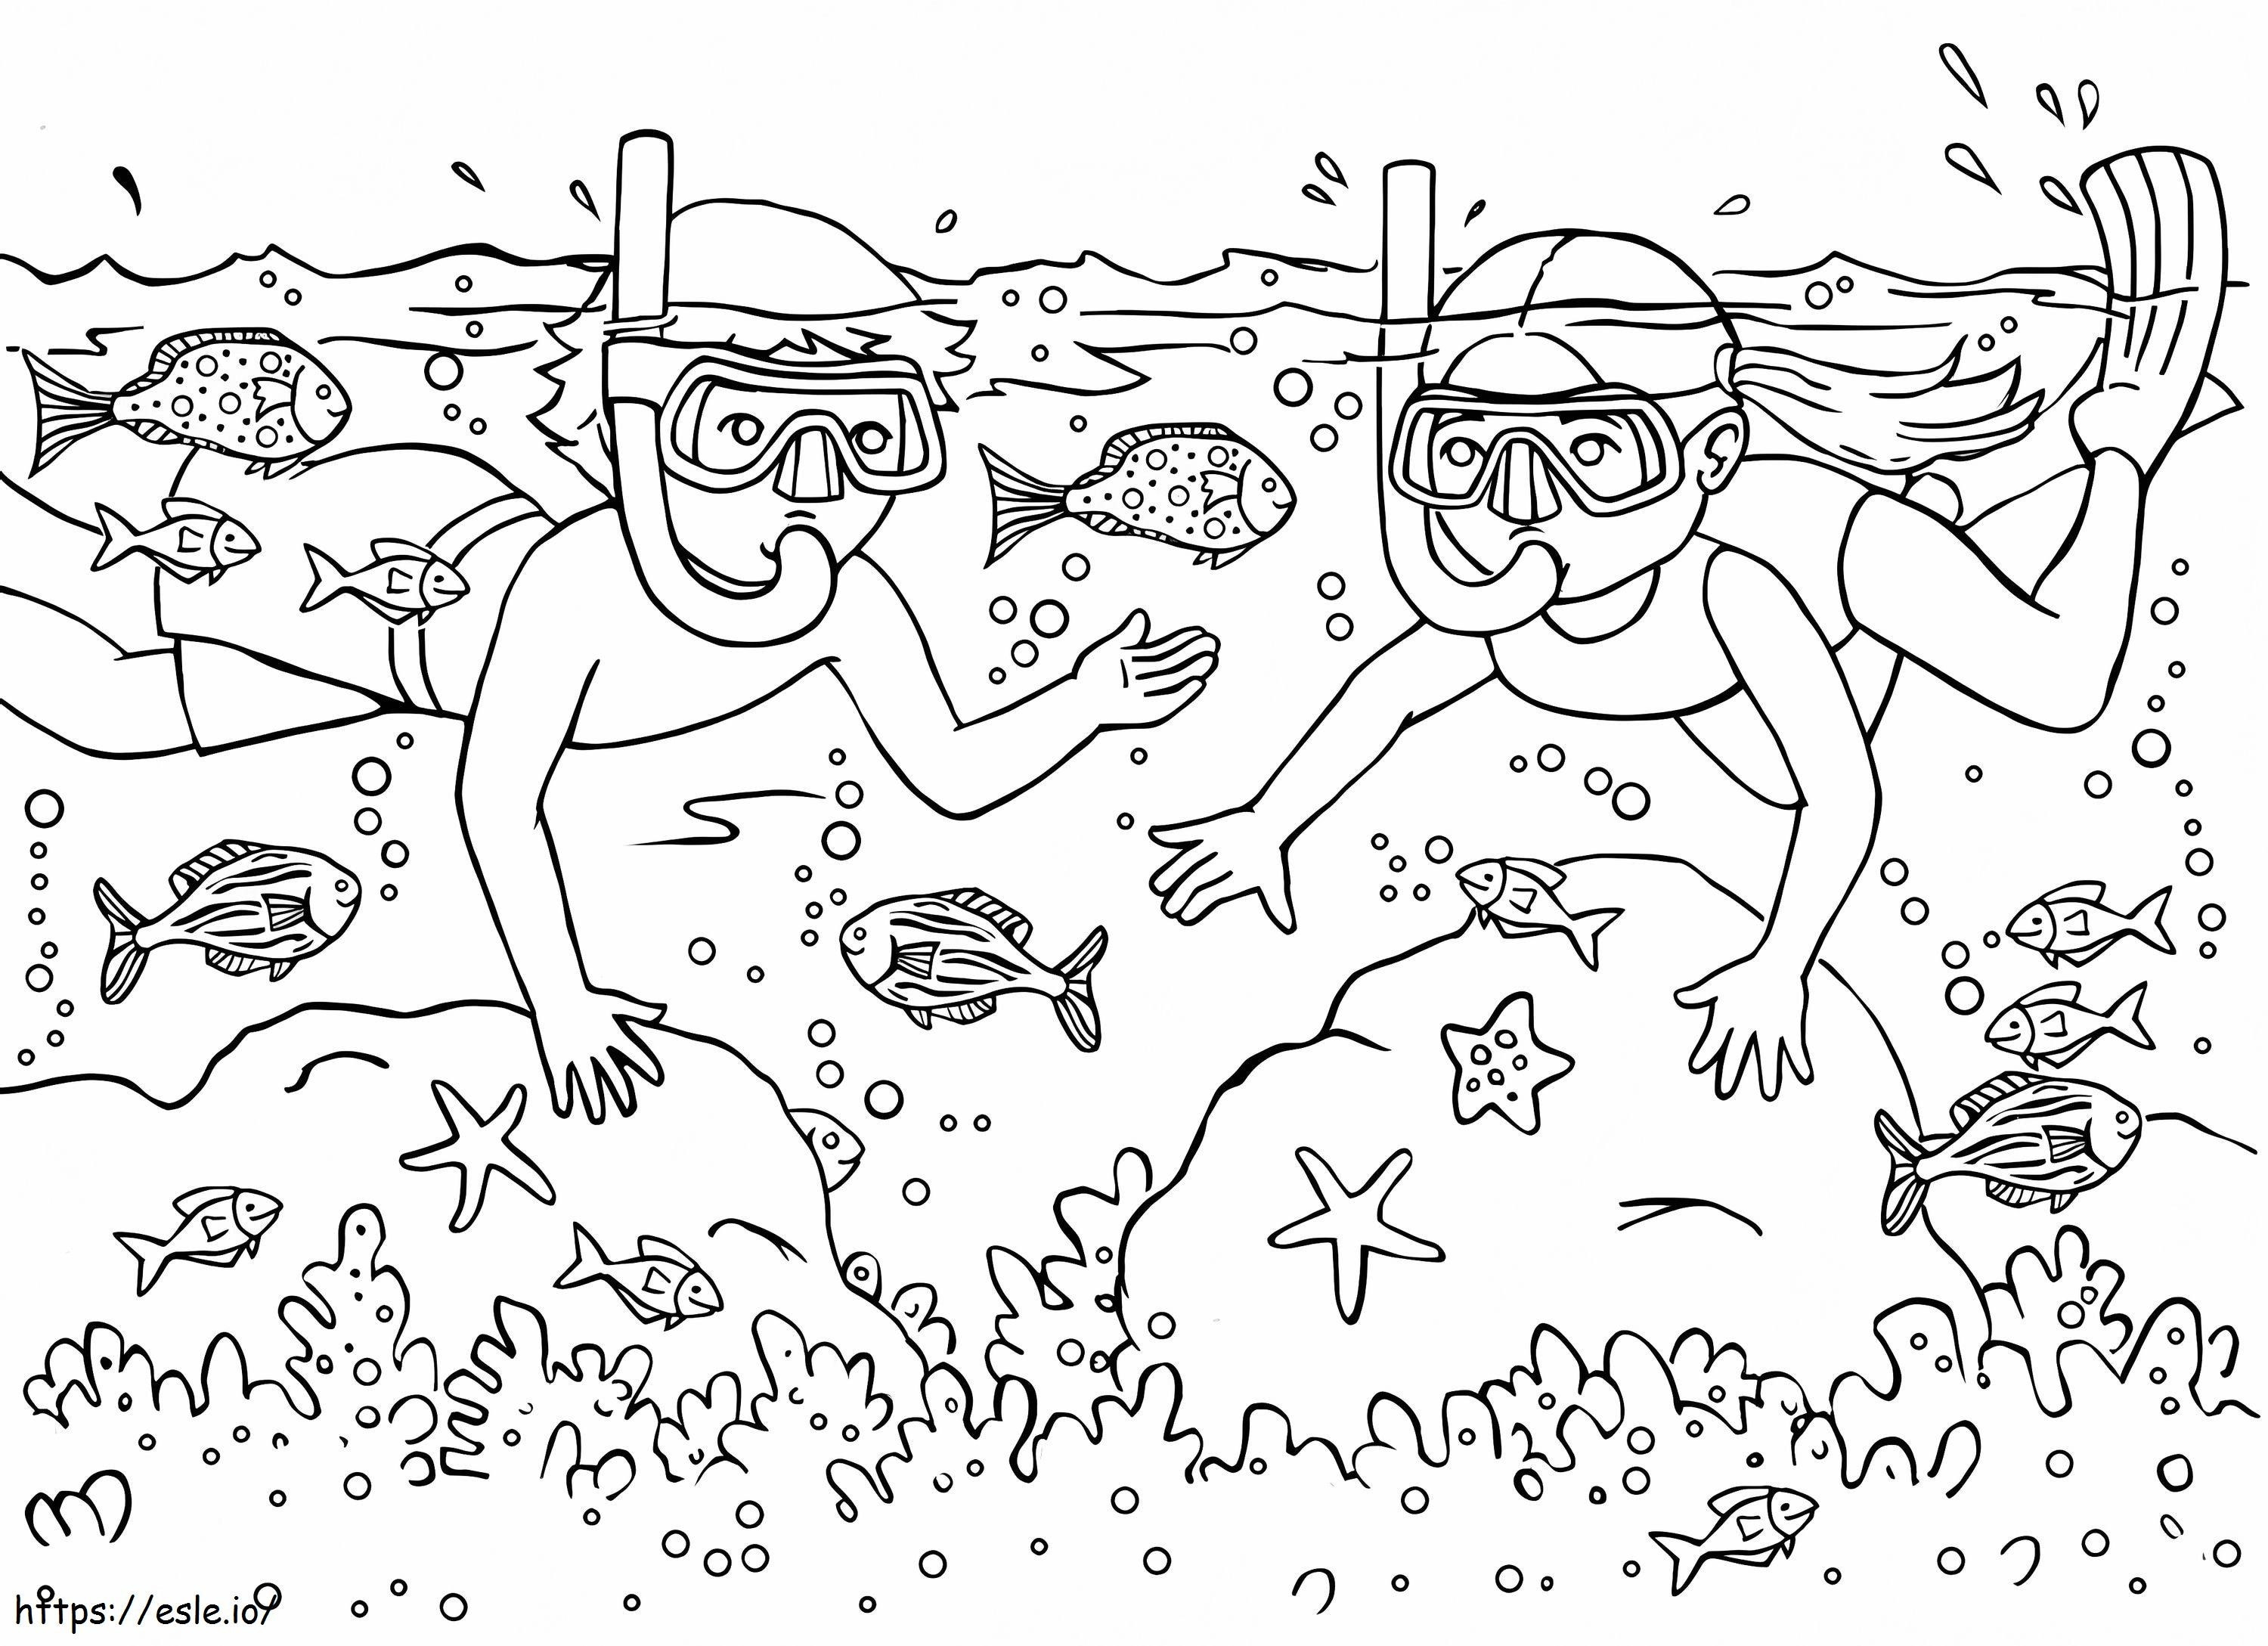 Two Divers coloring page